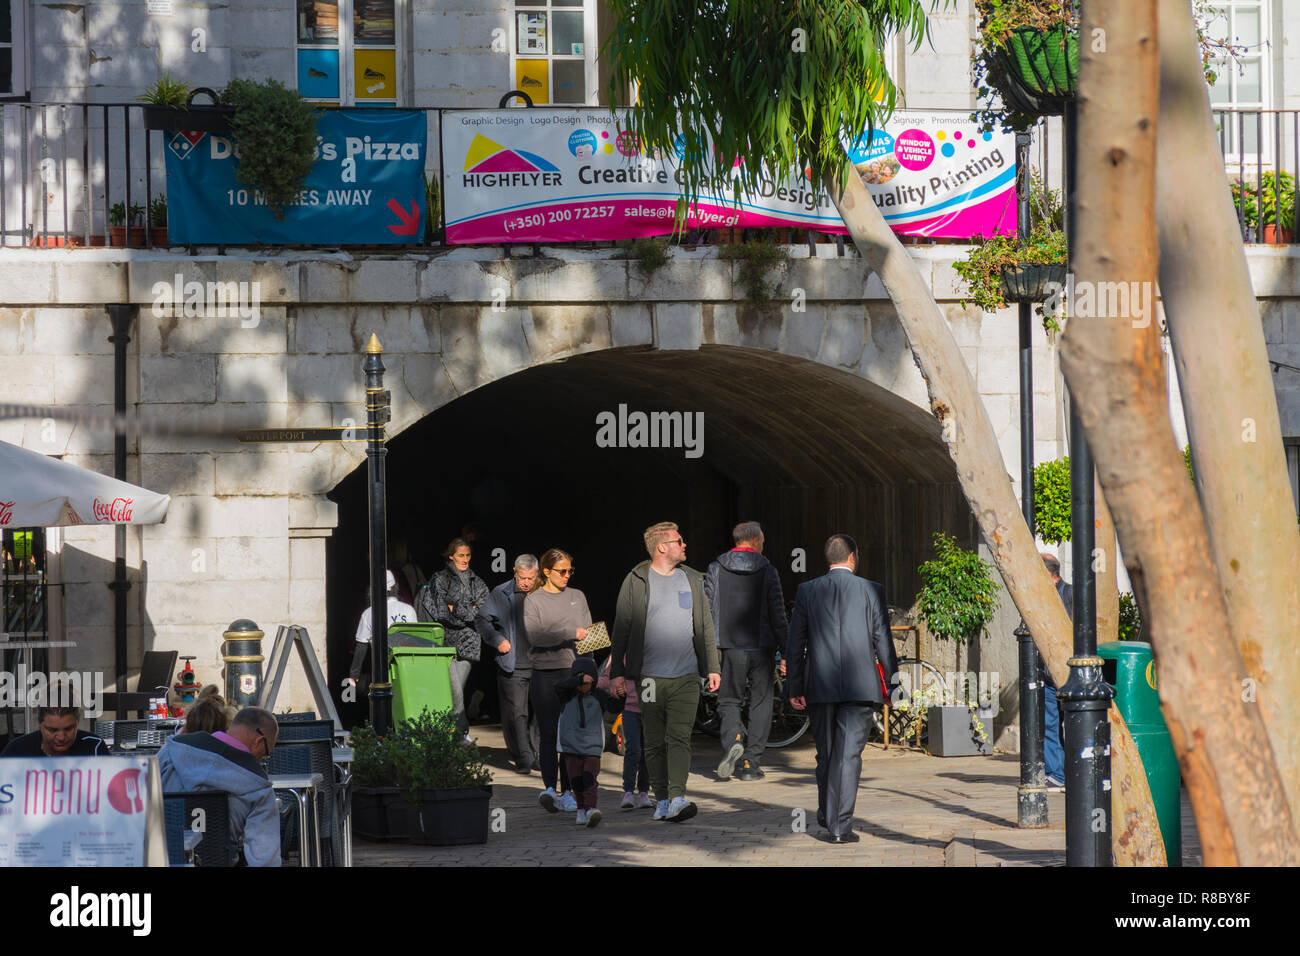 GIBRALTAR, GREAT BRITAIN, november 5, 2018 - Gate of Landport tunnel at Grand Casemates Square, place with a lot of bar terrace and street life Stock Photo